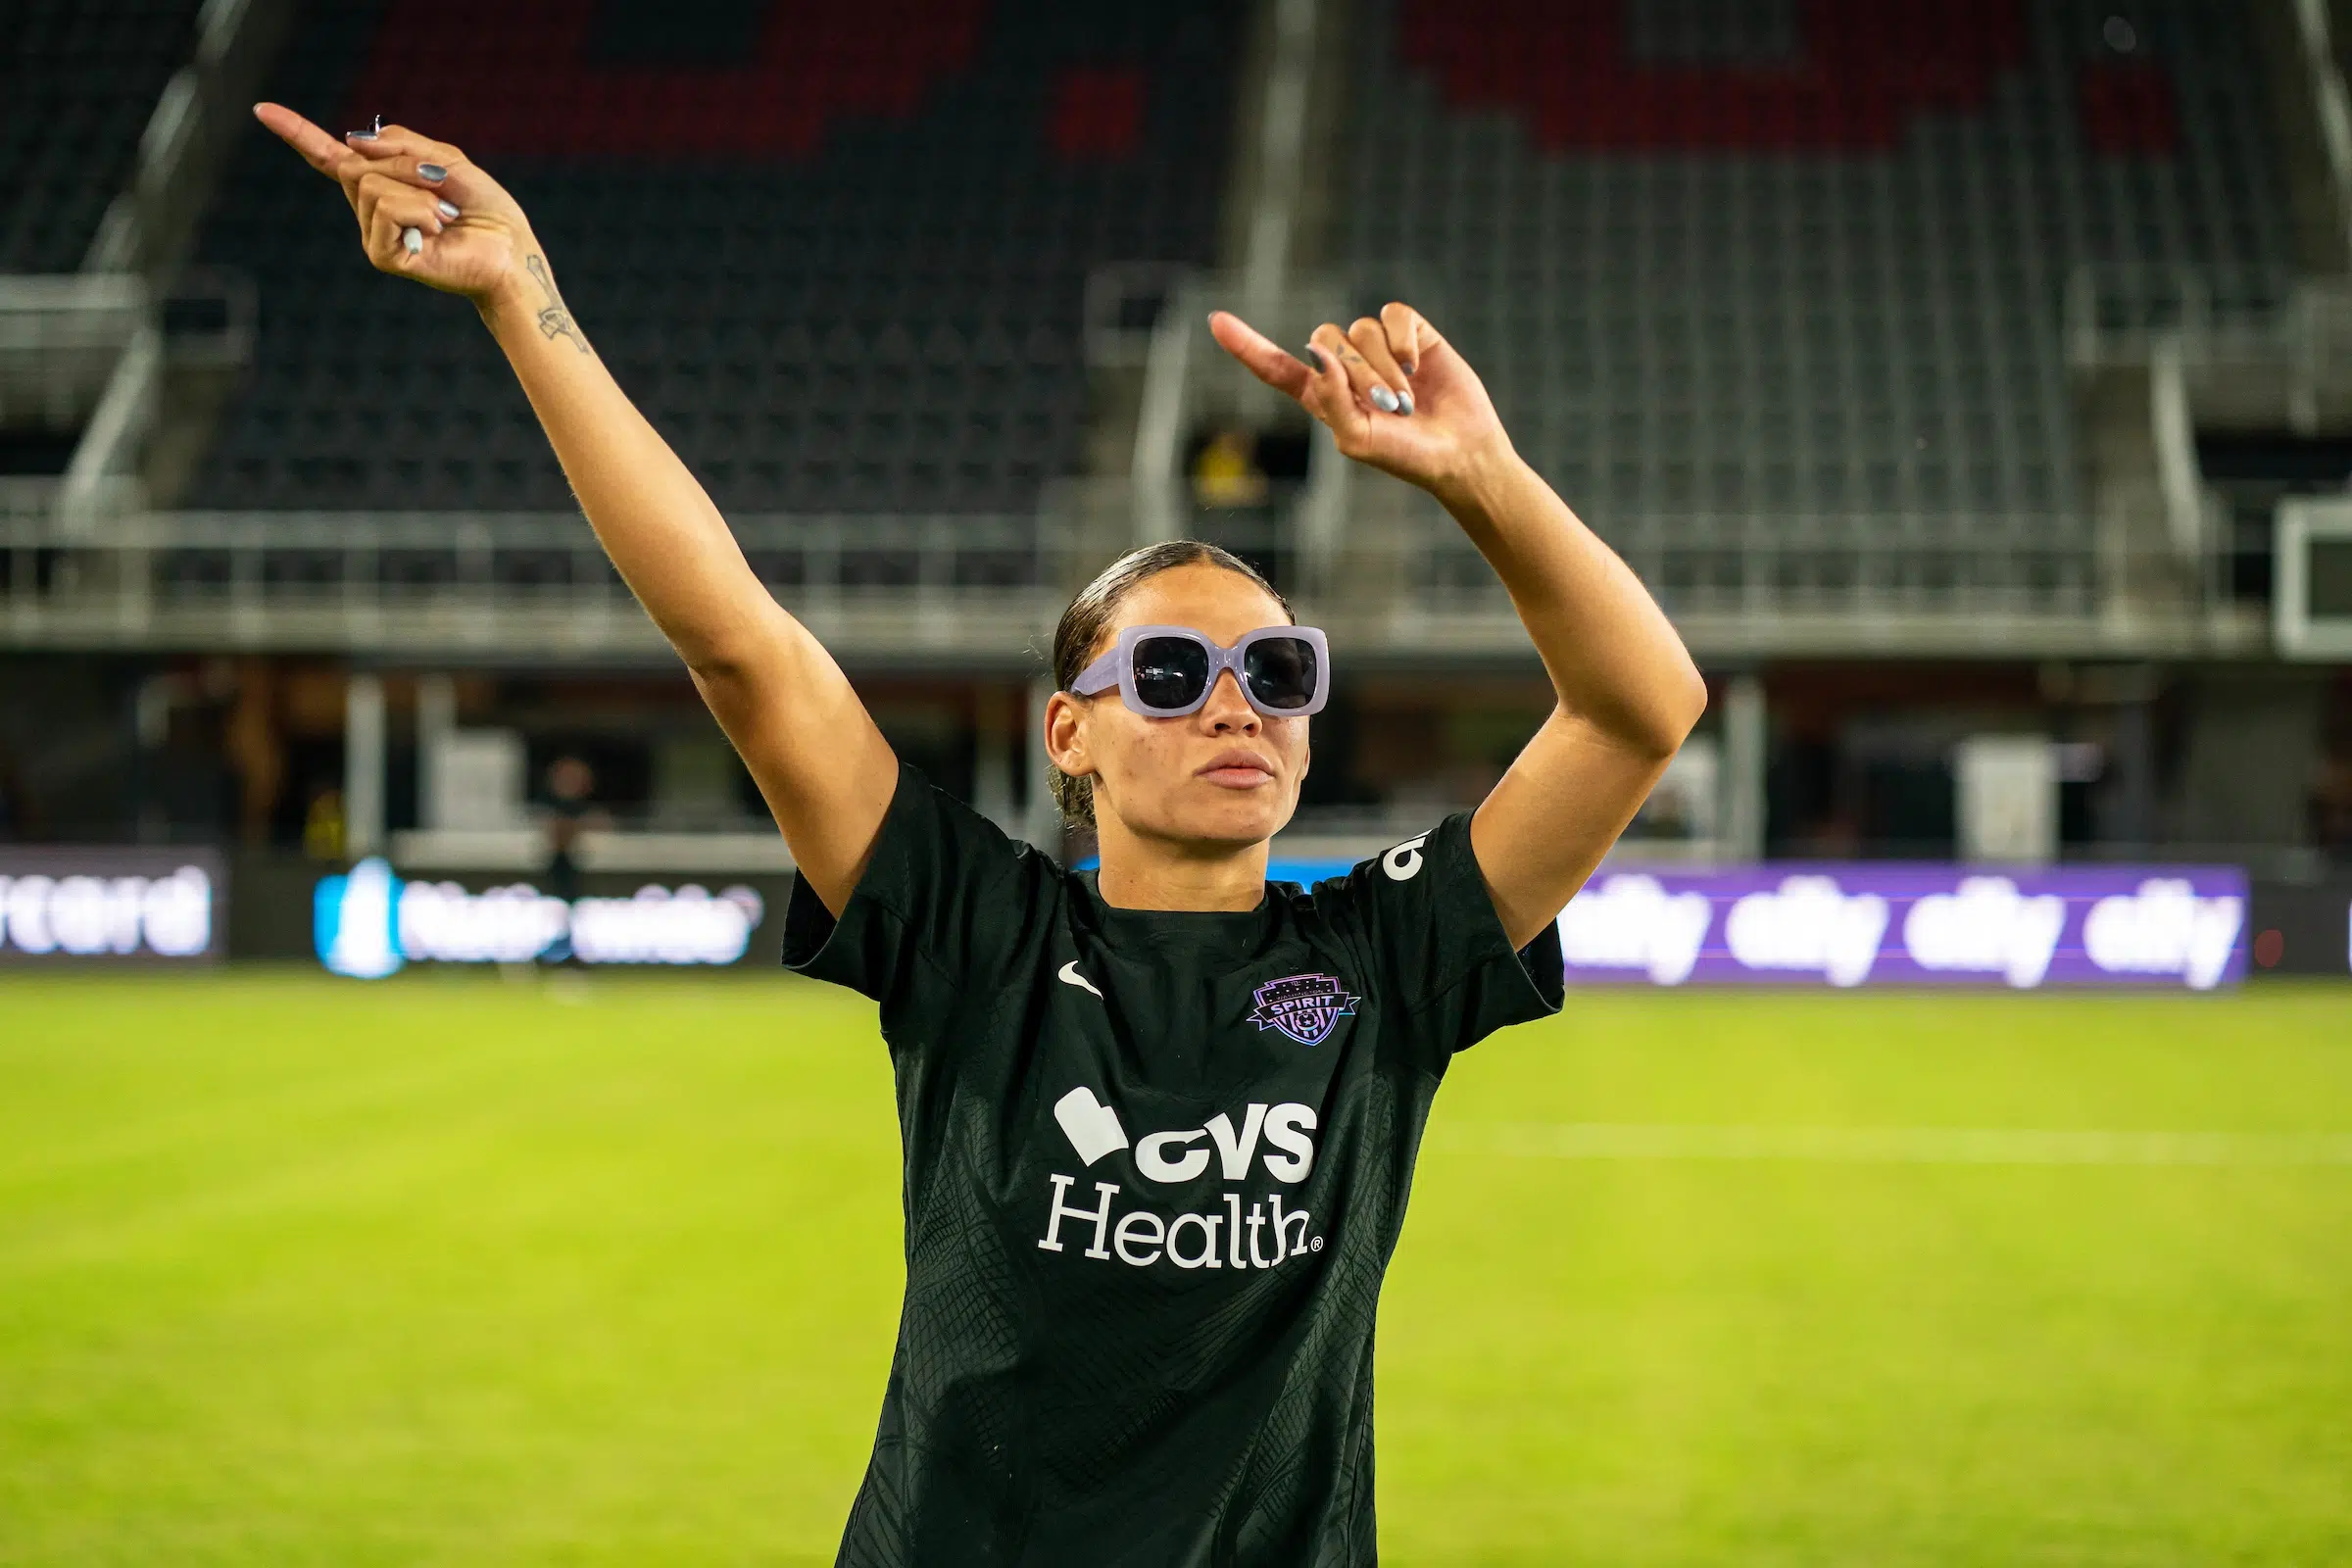 Trinity Rodman wears a black jersey and purple sunglasses as she dances with both hands in the air.